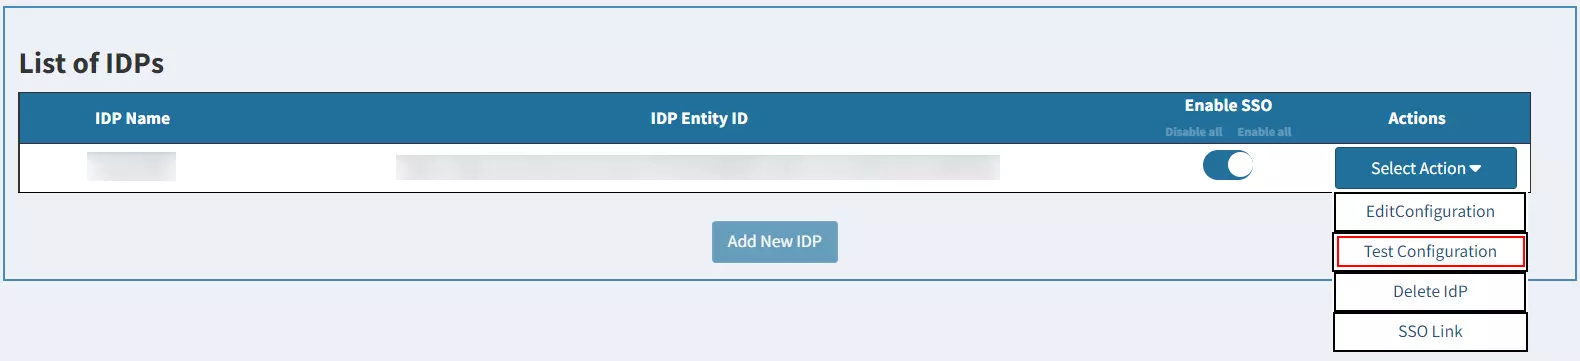 nopCommerce Single Sign-On (SSO) using Salesforce as IDP - Click on Test Configuration